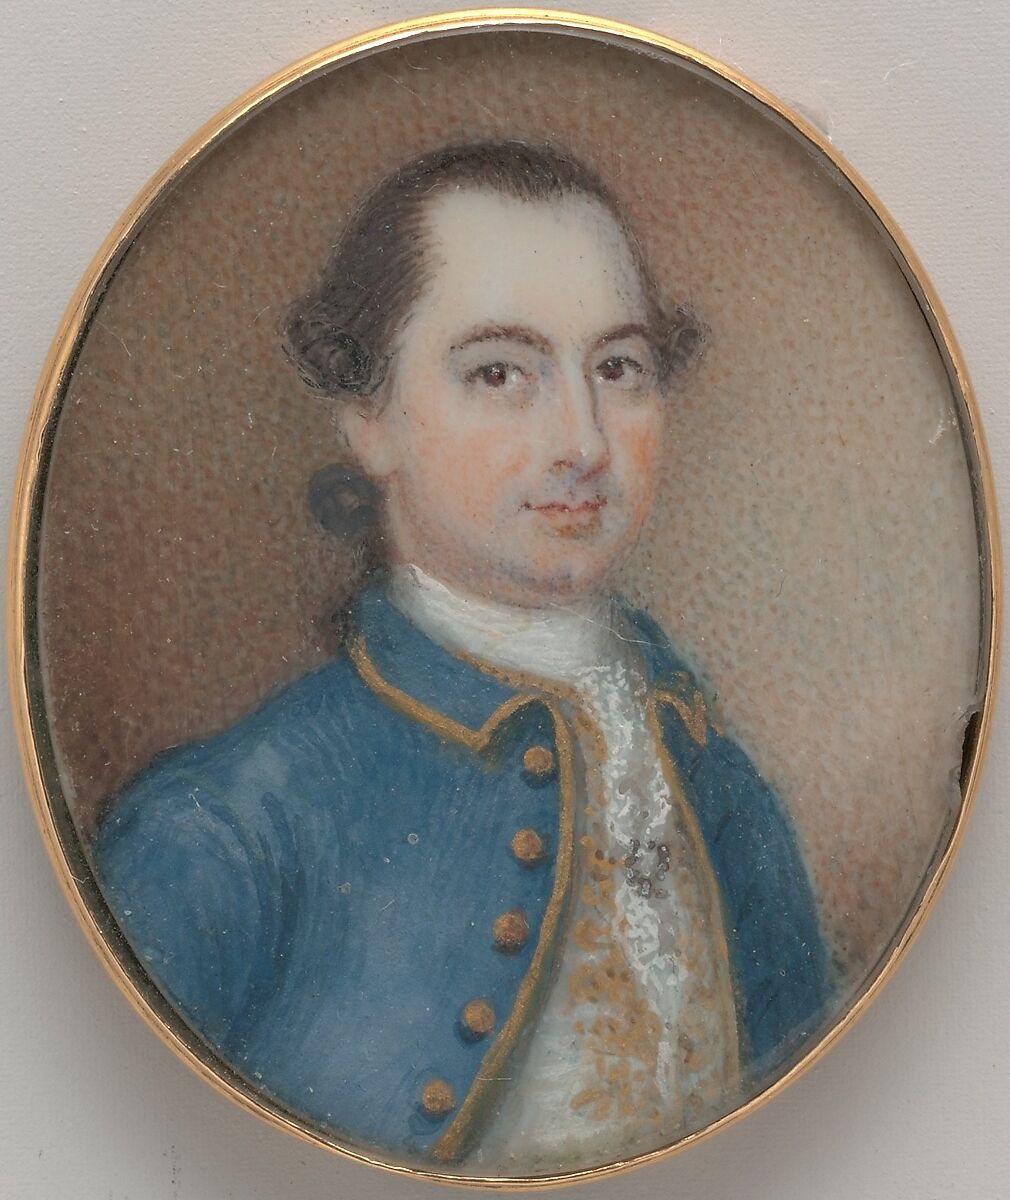 Archibald McCall, John Hesselius  American, Watercolor, gold leaf, and lead white on ivory, American